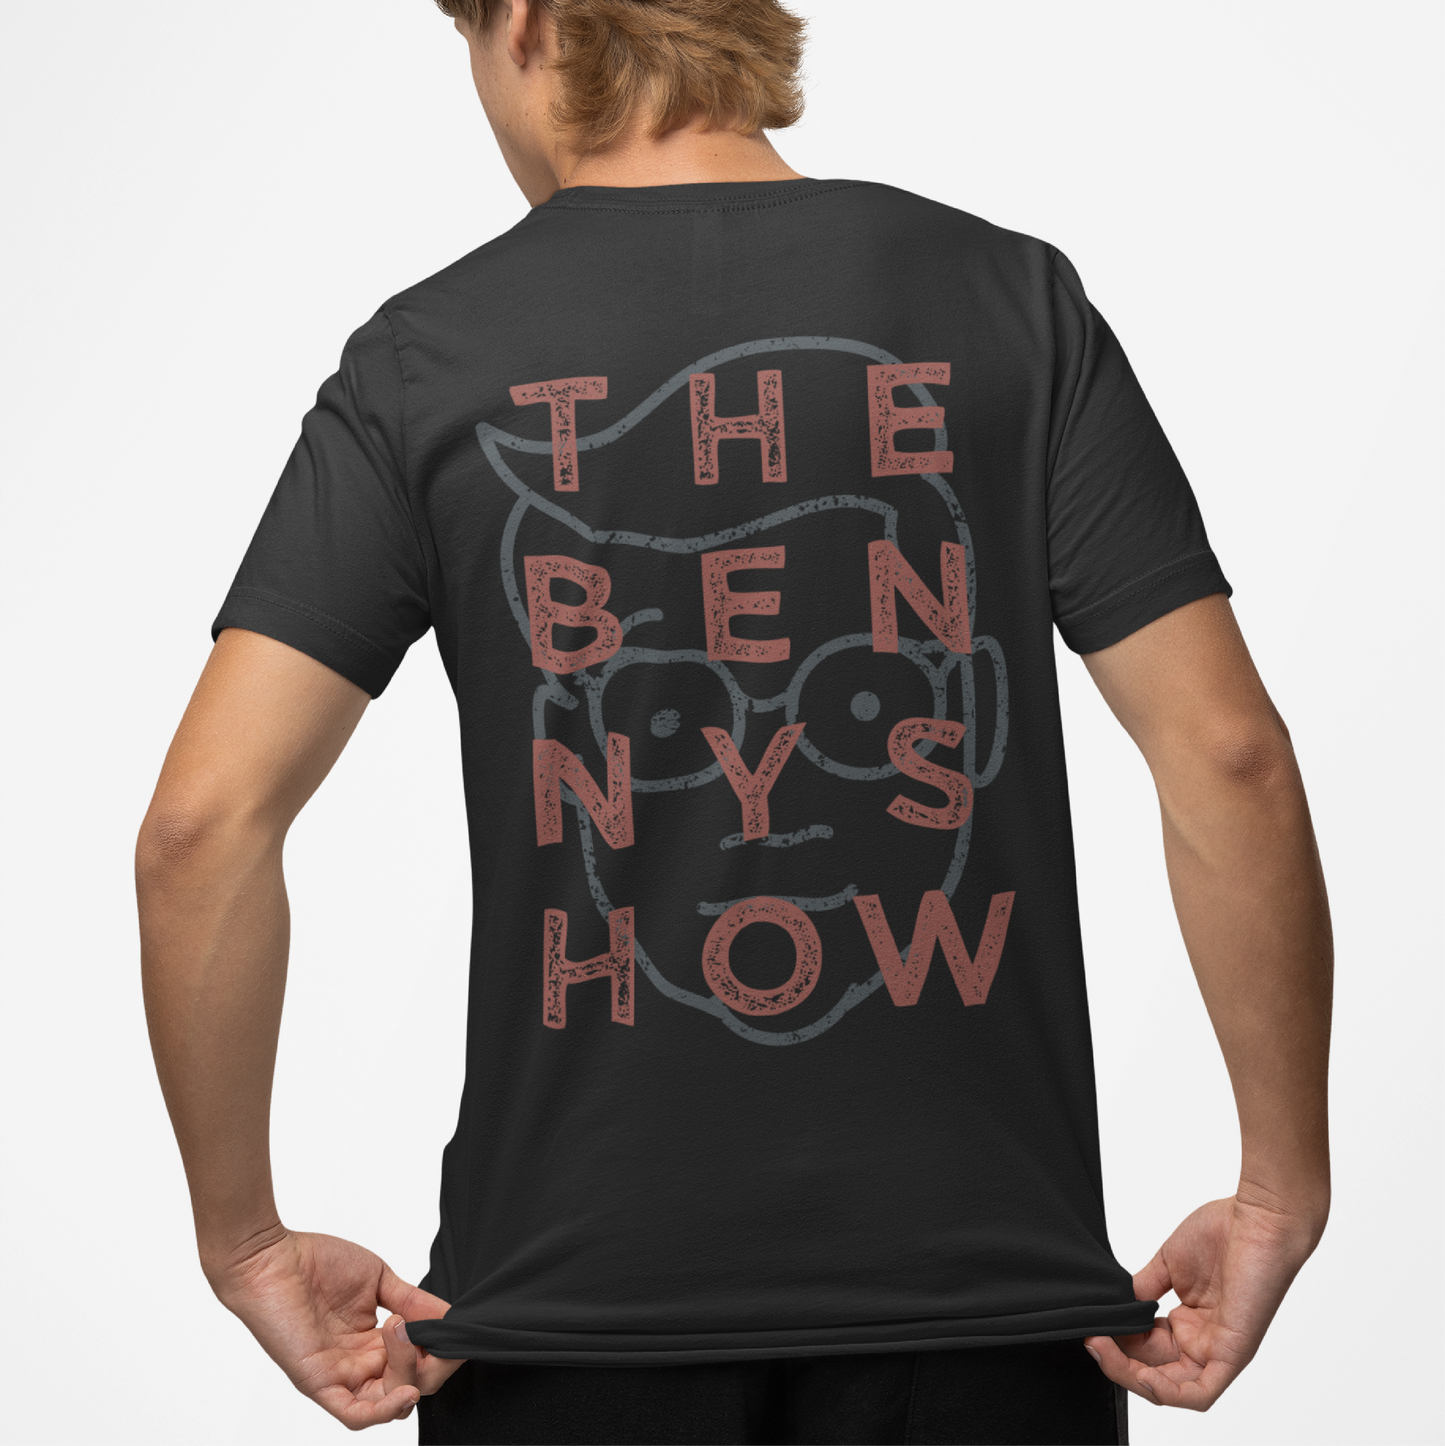 THE BENNY SHOW T-shirt